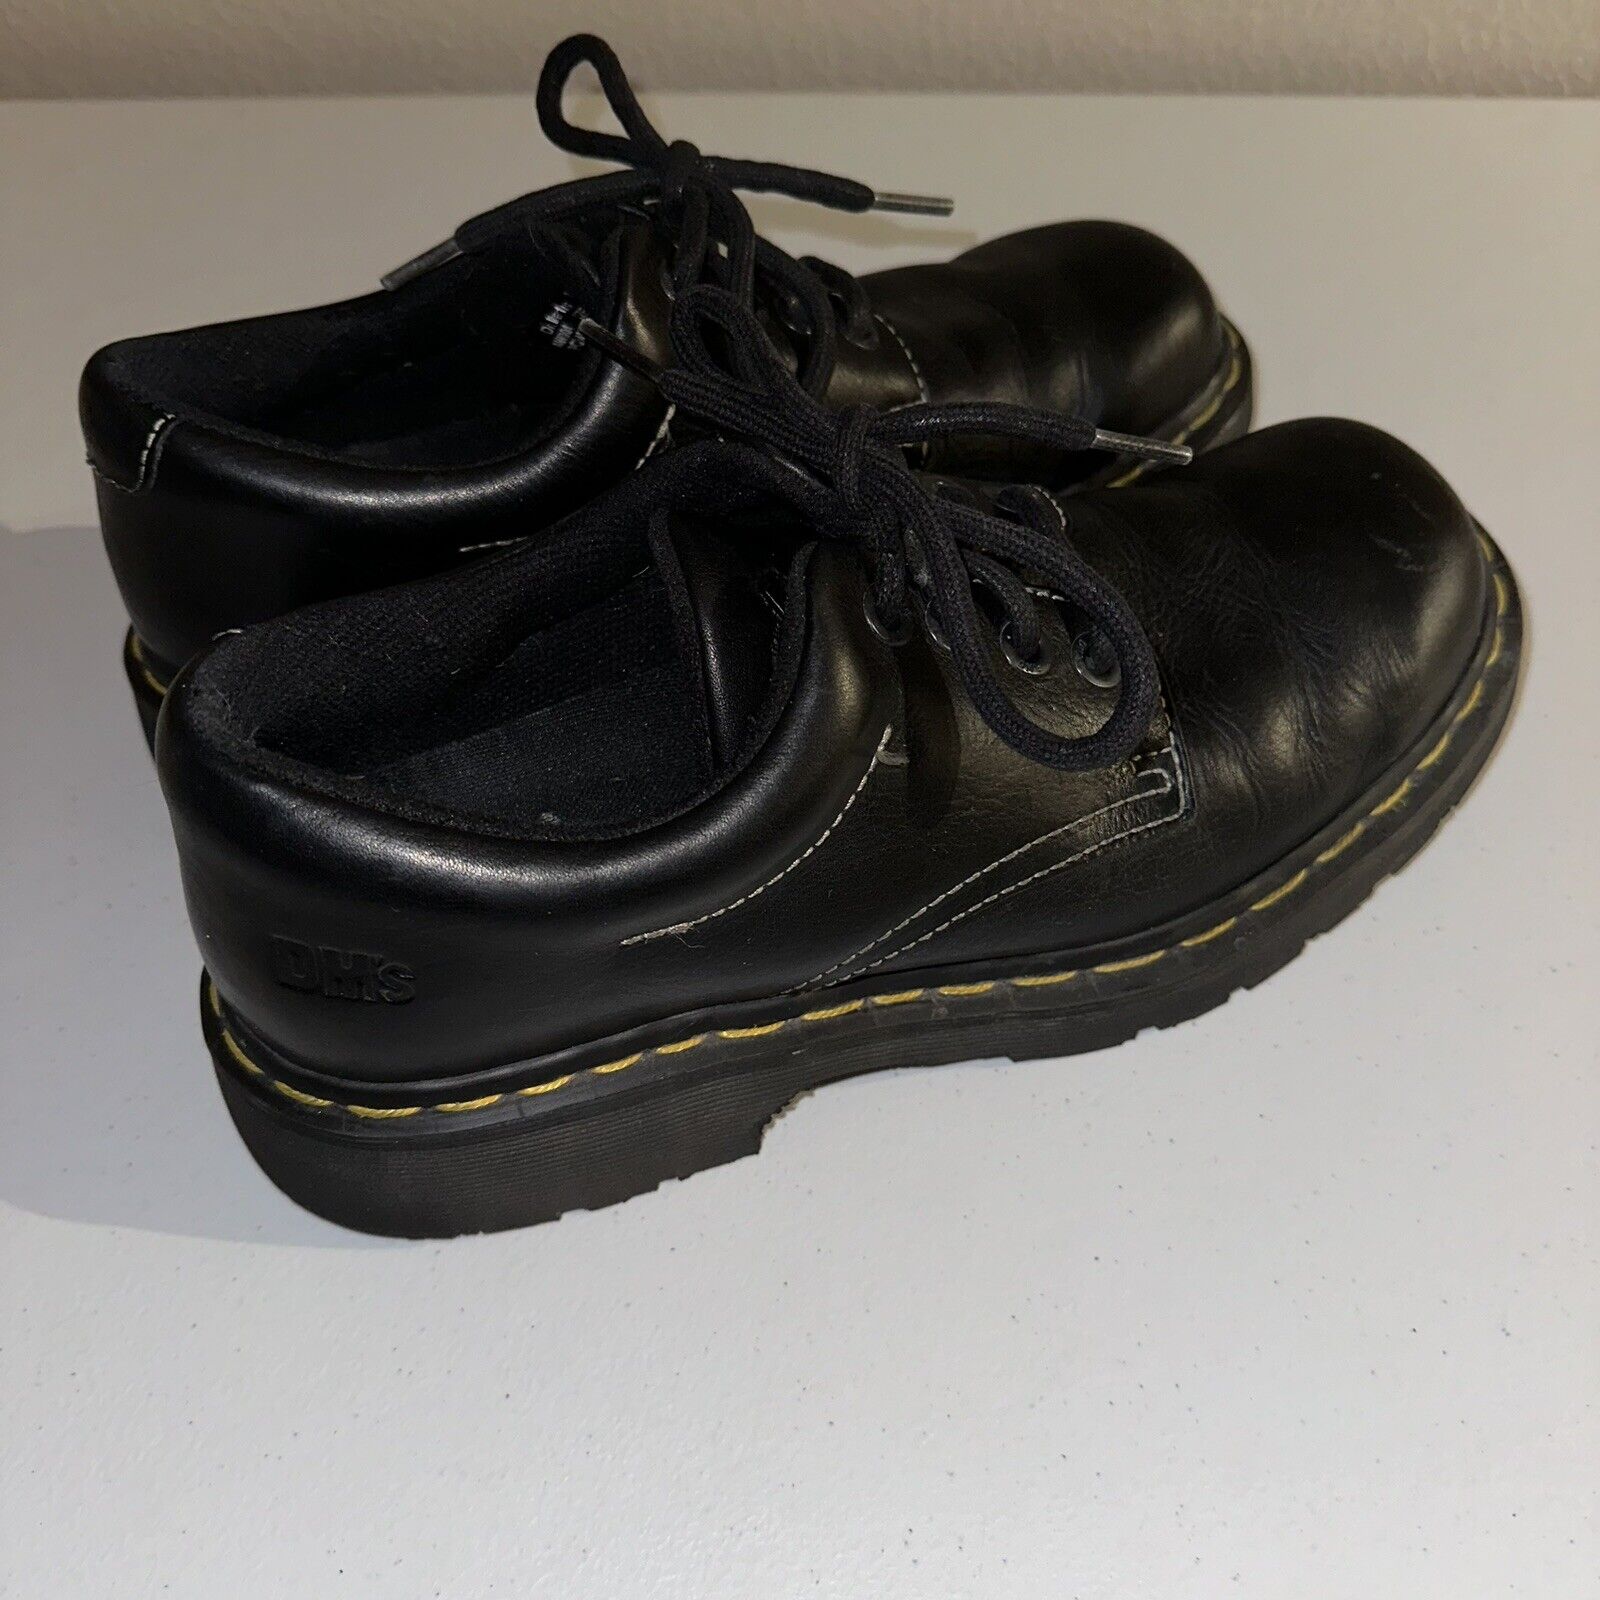 Vintage Dr Martens Chunky Black Low Top Shoes Size US 10 UK 9 Made In England